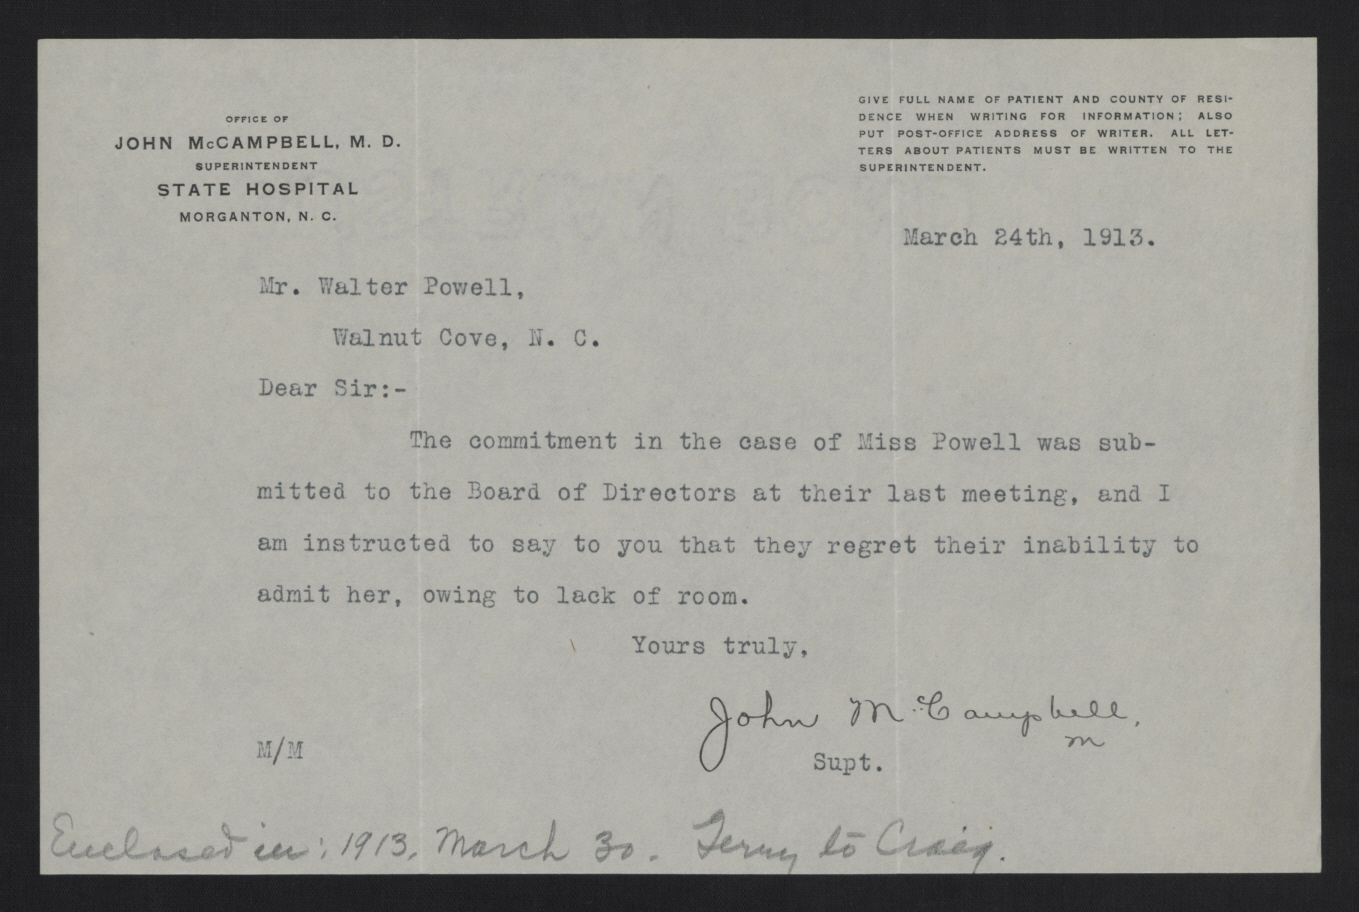 Letter from McCampbell to Jones, March 11, 1913